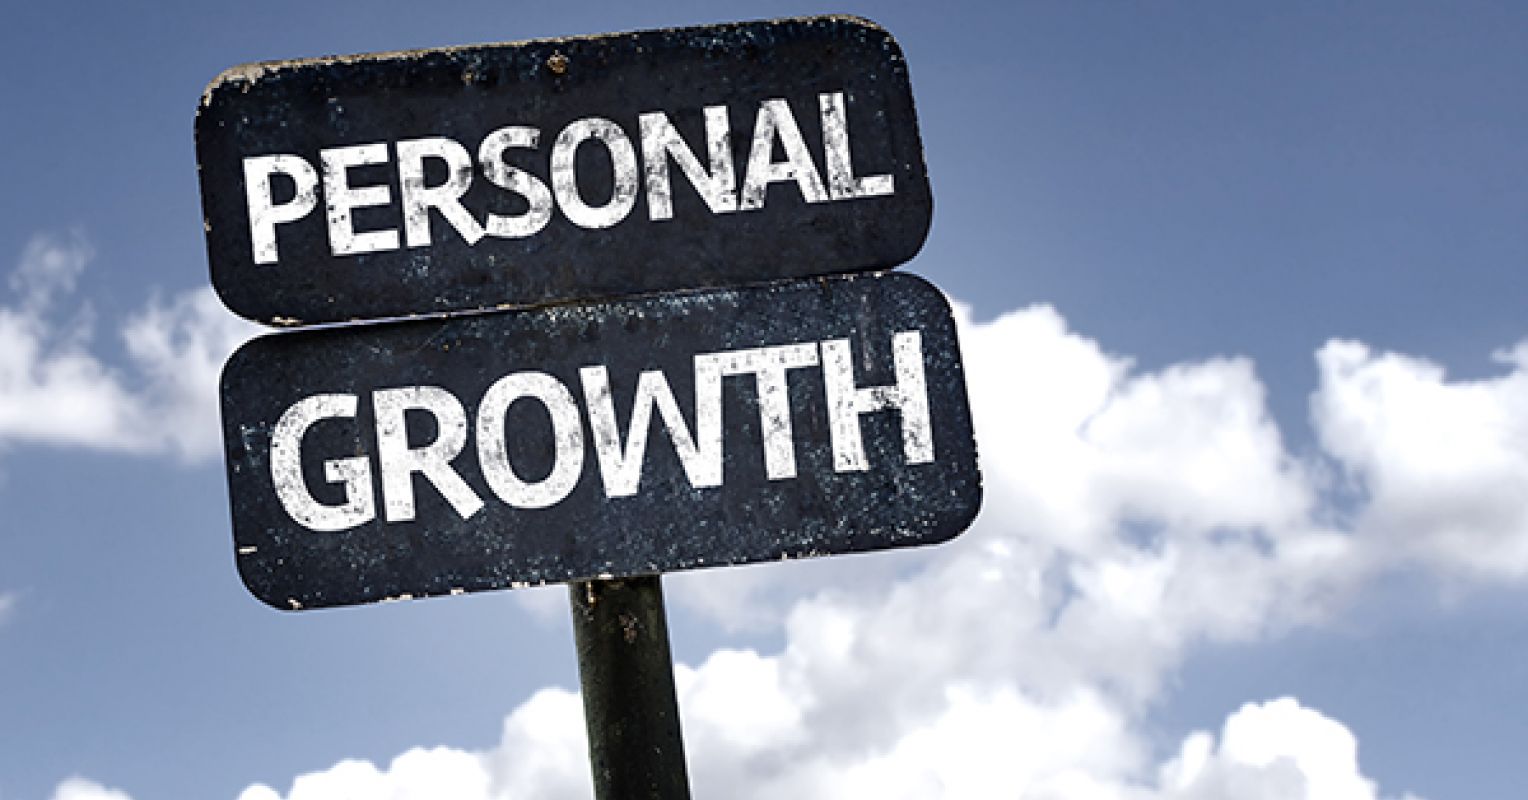 personal growth